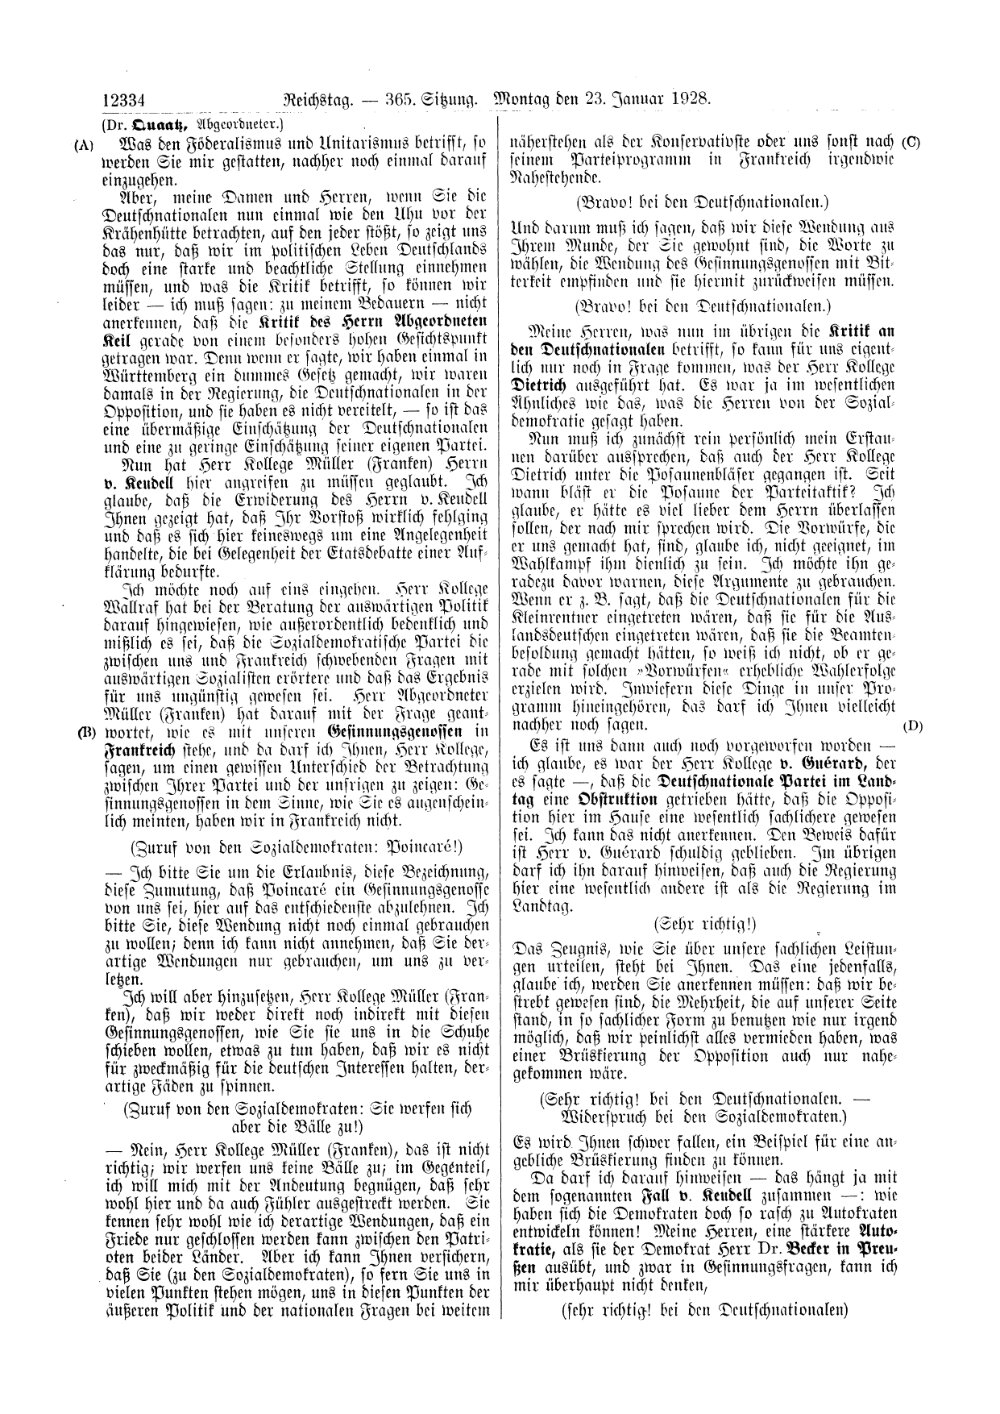 Scan of page 12334